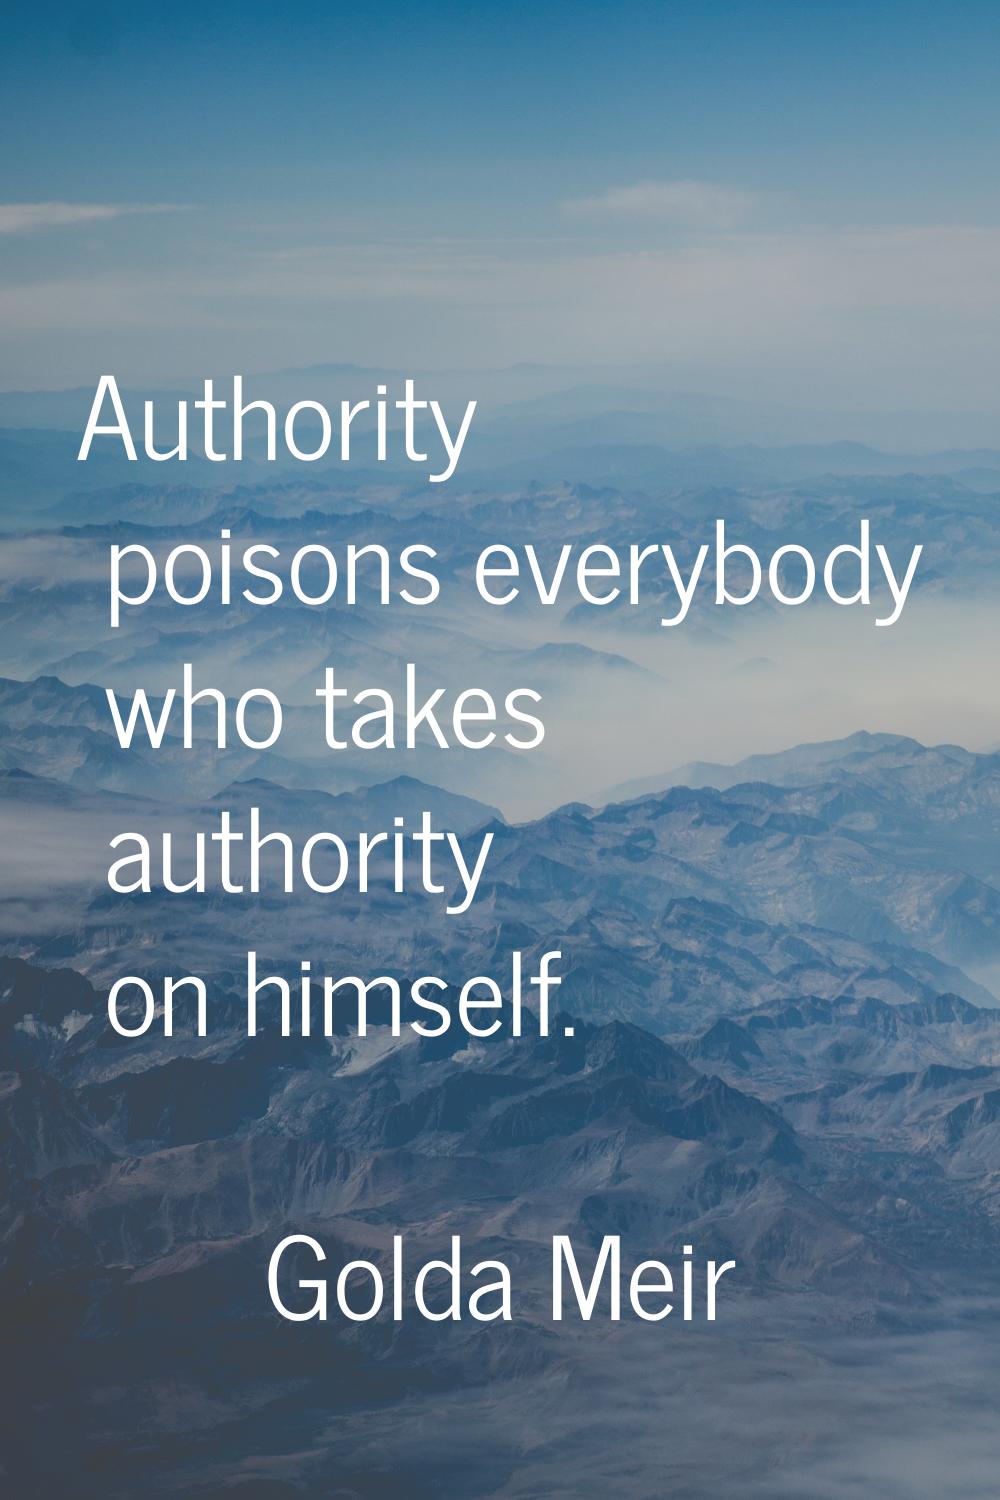 Authority poisons everybody who takes authority on himself.